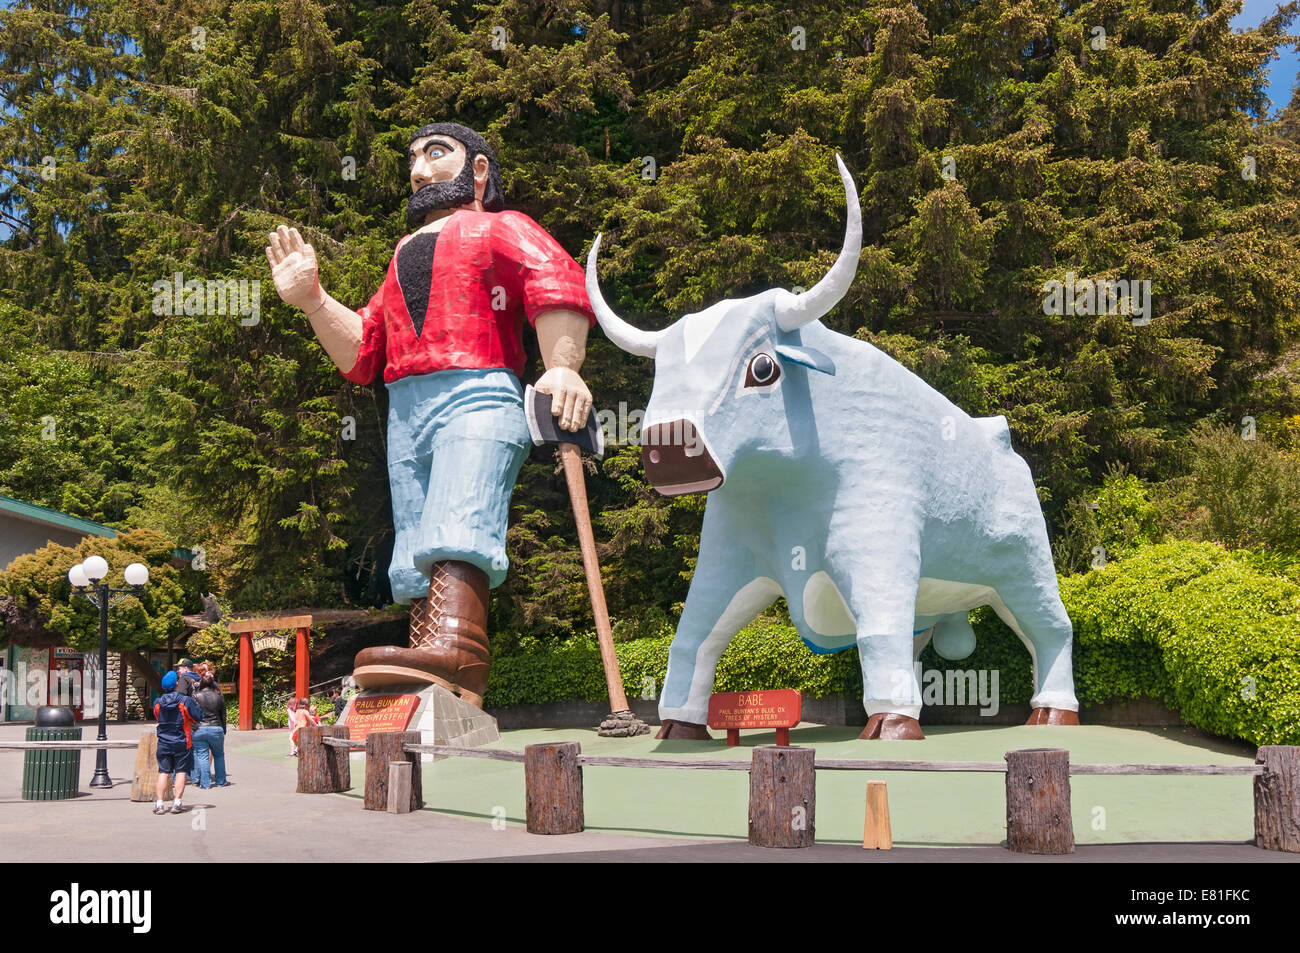 California, Klamath, Trees of Mystery, sculpture of Paul Bunyan and his blue ox 'Babe' Stock Photo